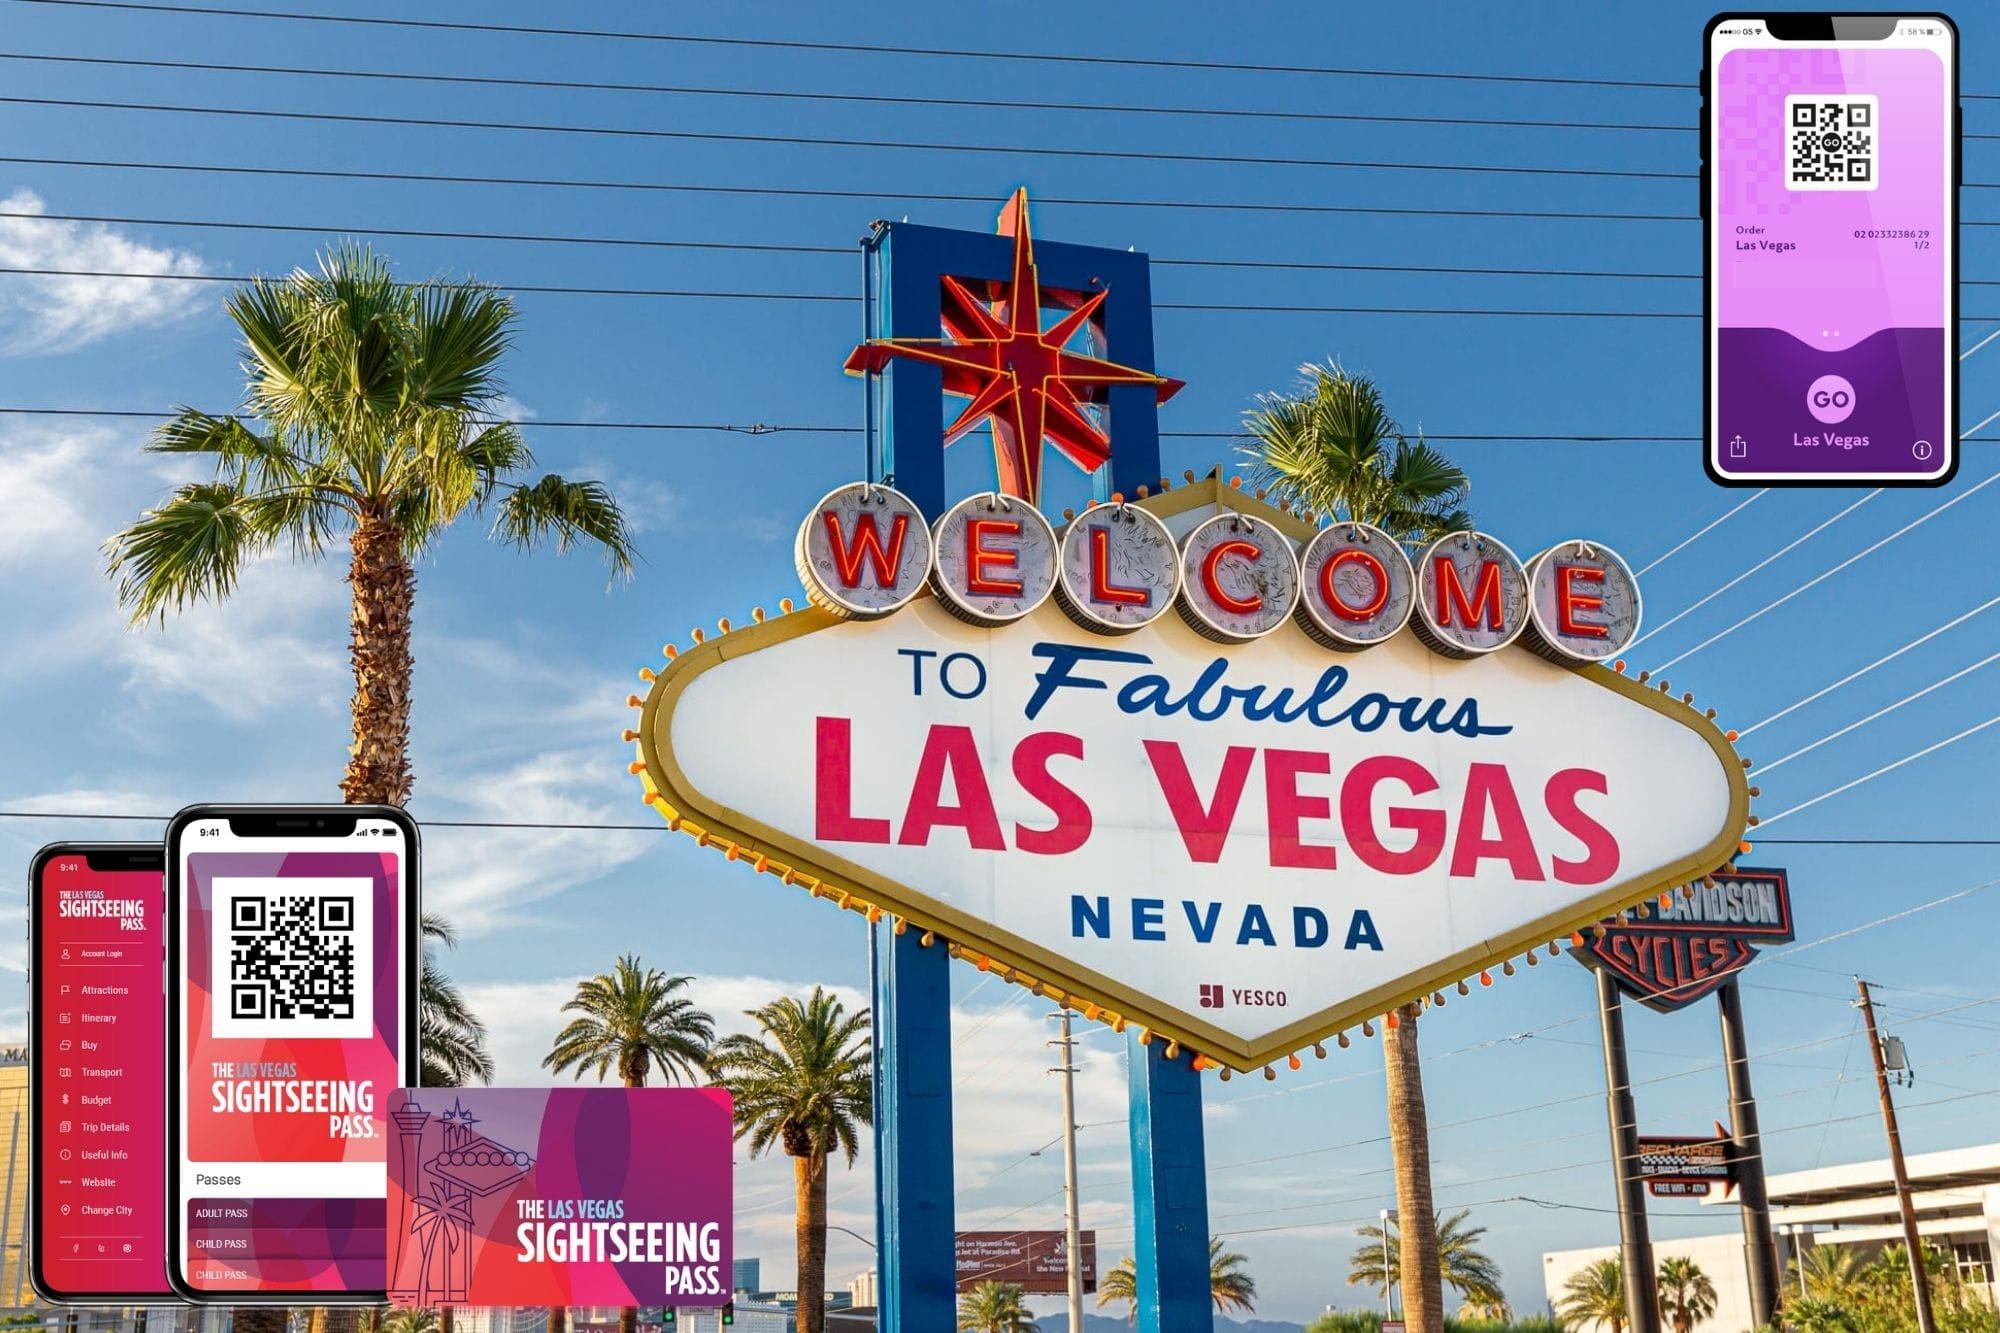 Tips For Visiting The Welcome To Fabulous Las Vegas Sign